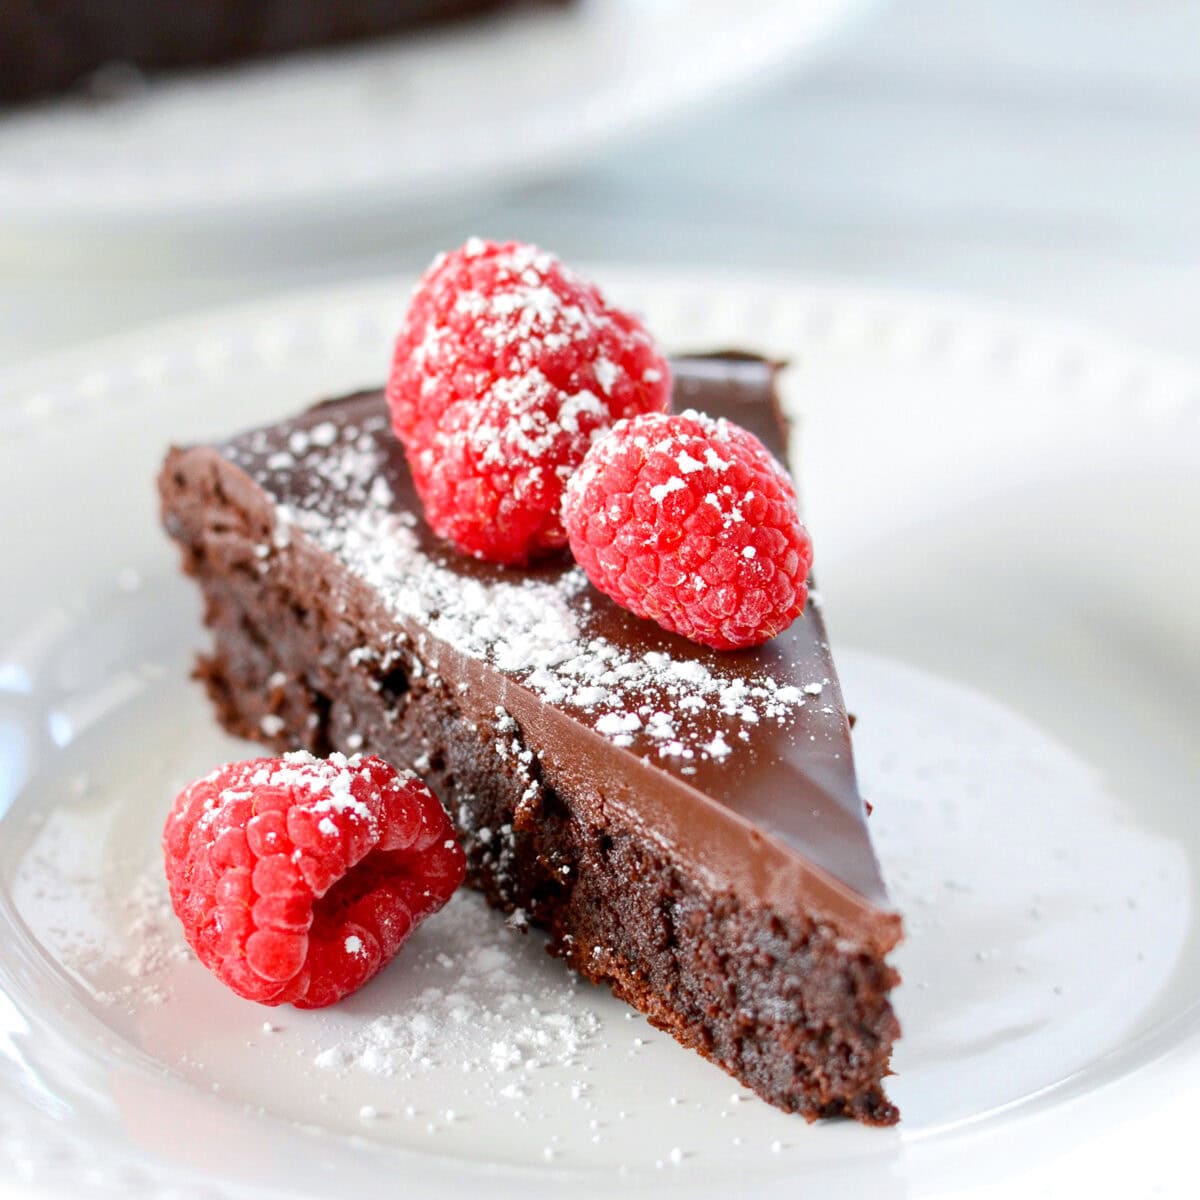 Slice of flourless chocolate cake sprinkled with powdered sugar and topped with fresh raspberries.